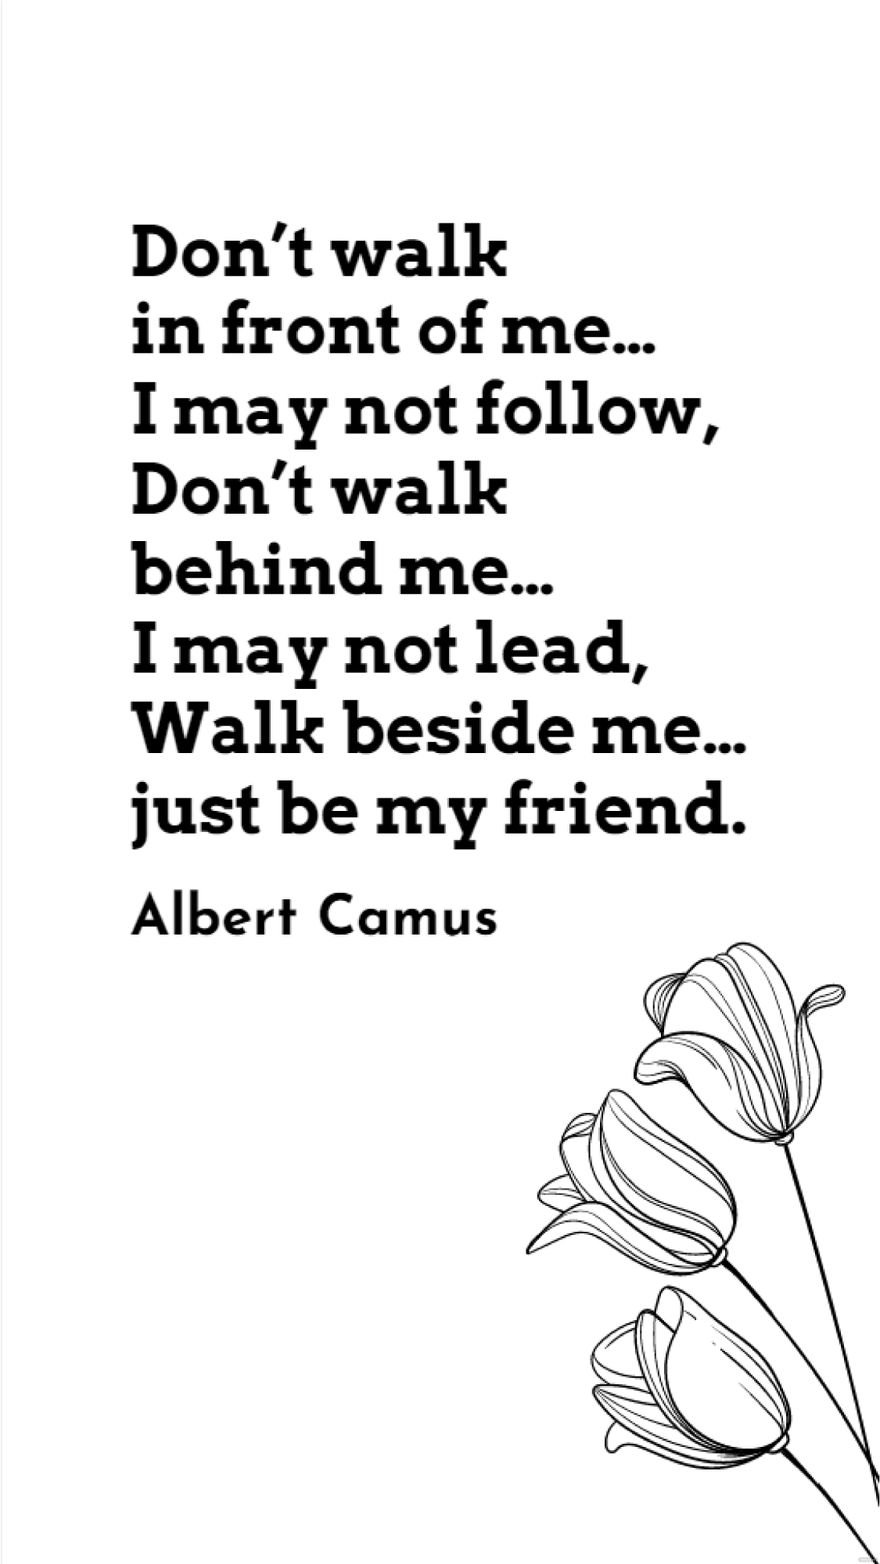 Albert Camus - Don’t walk in front of me… I may not follow, Don’t walk behind me… I may not lead, Walk beside me… just be my friend